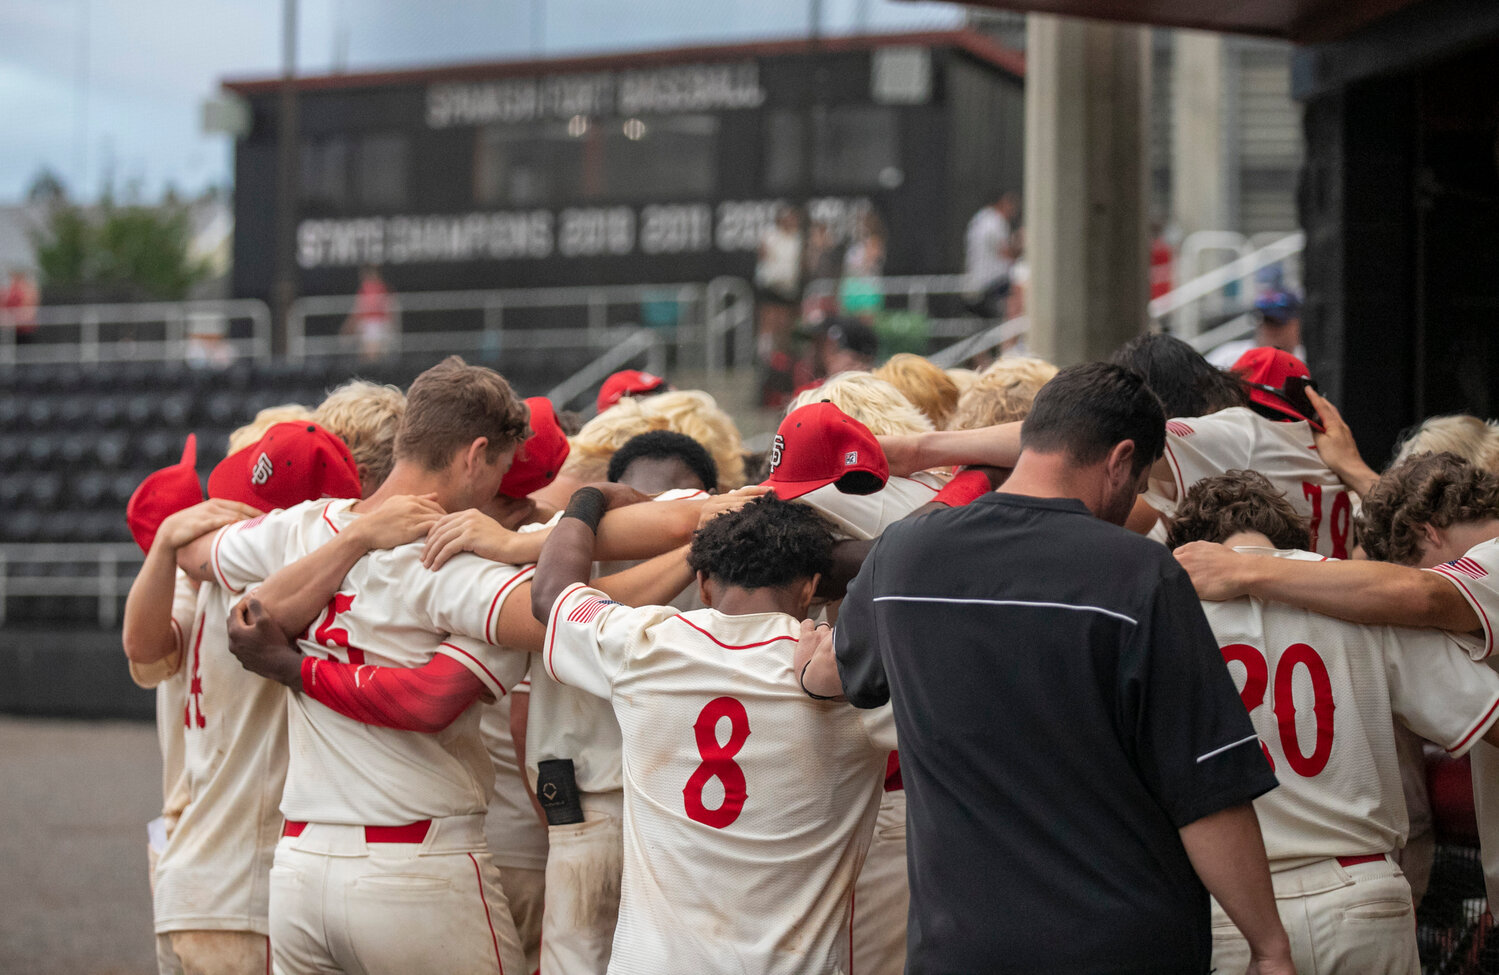 A postgame prayer is how the Spanish Fort Toros ended their Saturday following a walk-off win over Saraland to advance to the AHSAA state semifinals next week against Stanhope Elmore.